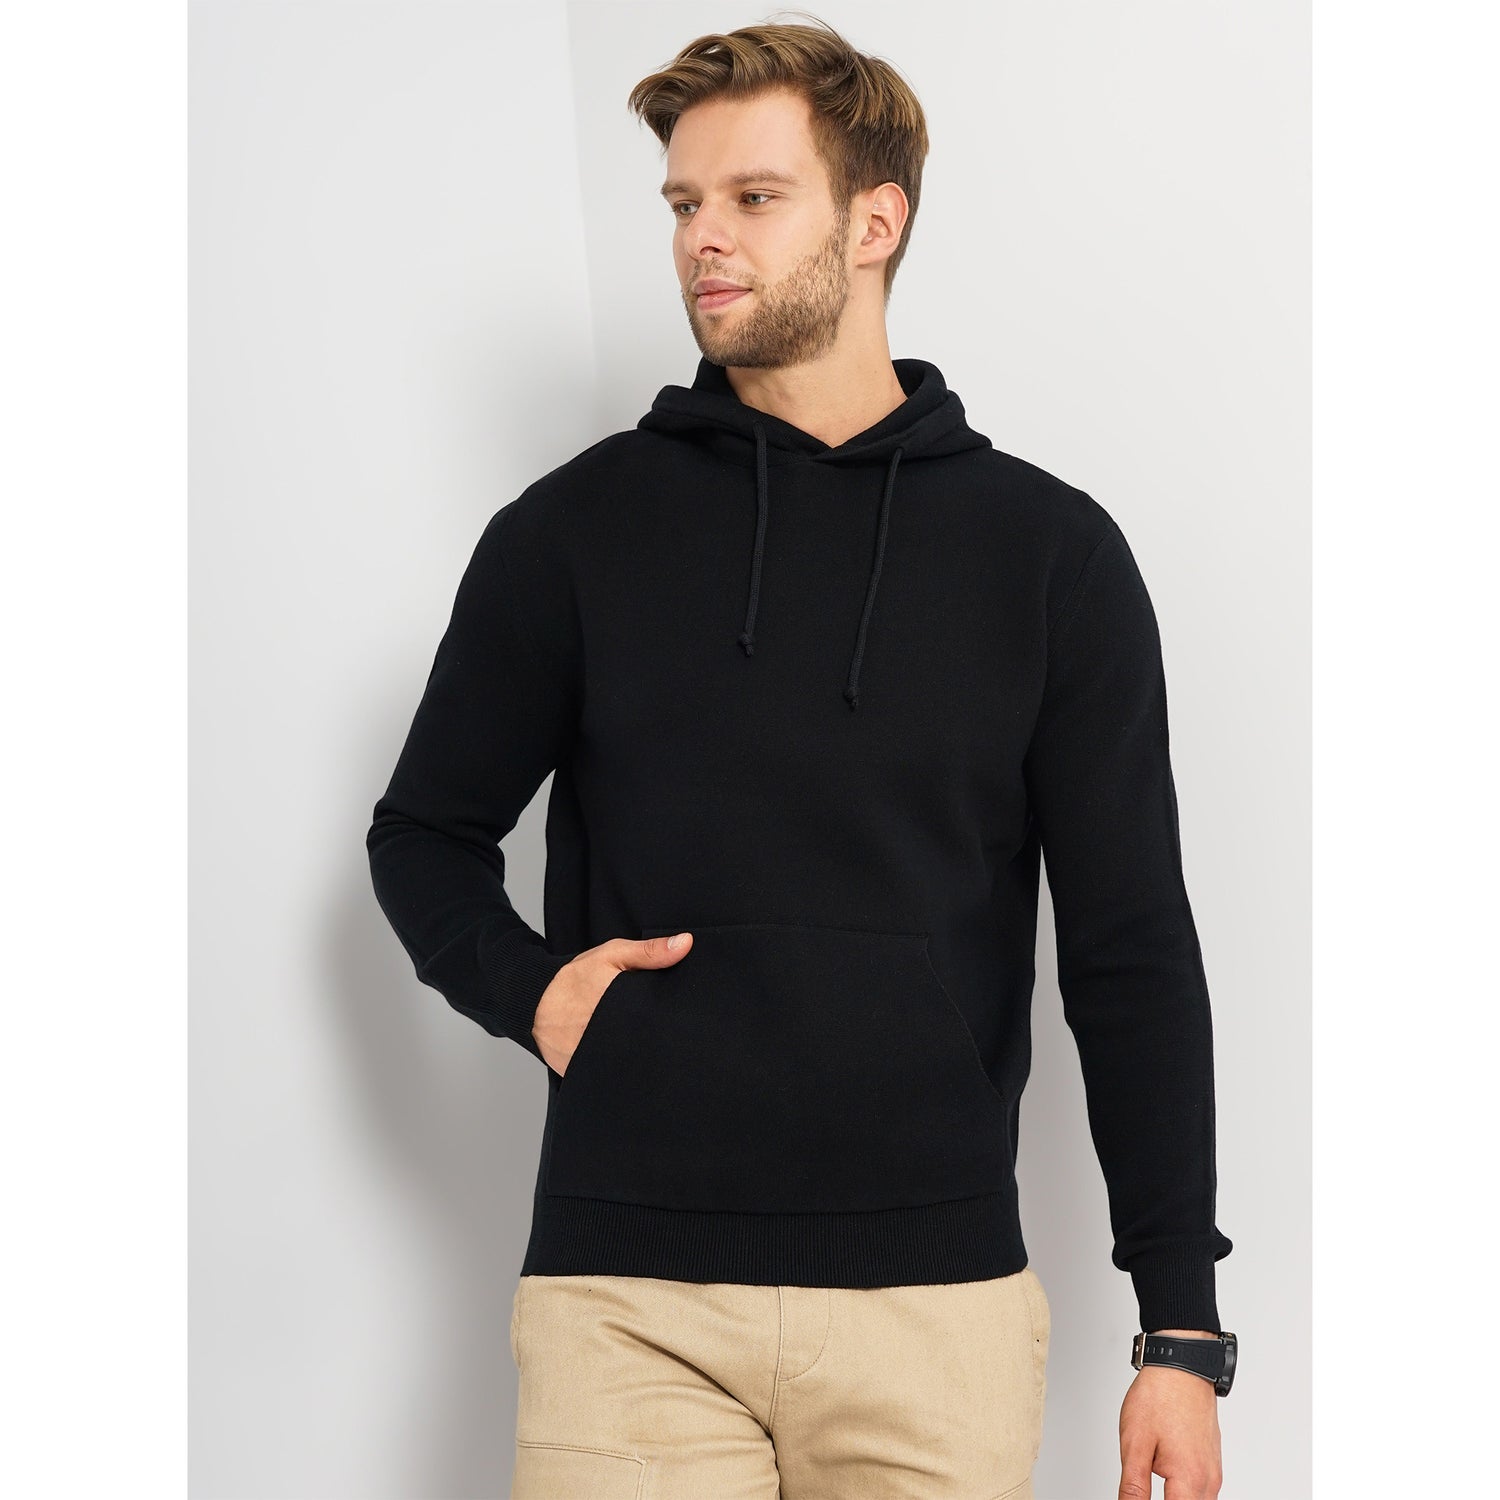 Black Solid Cotton Blend Sweaters